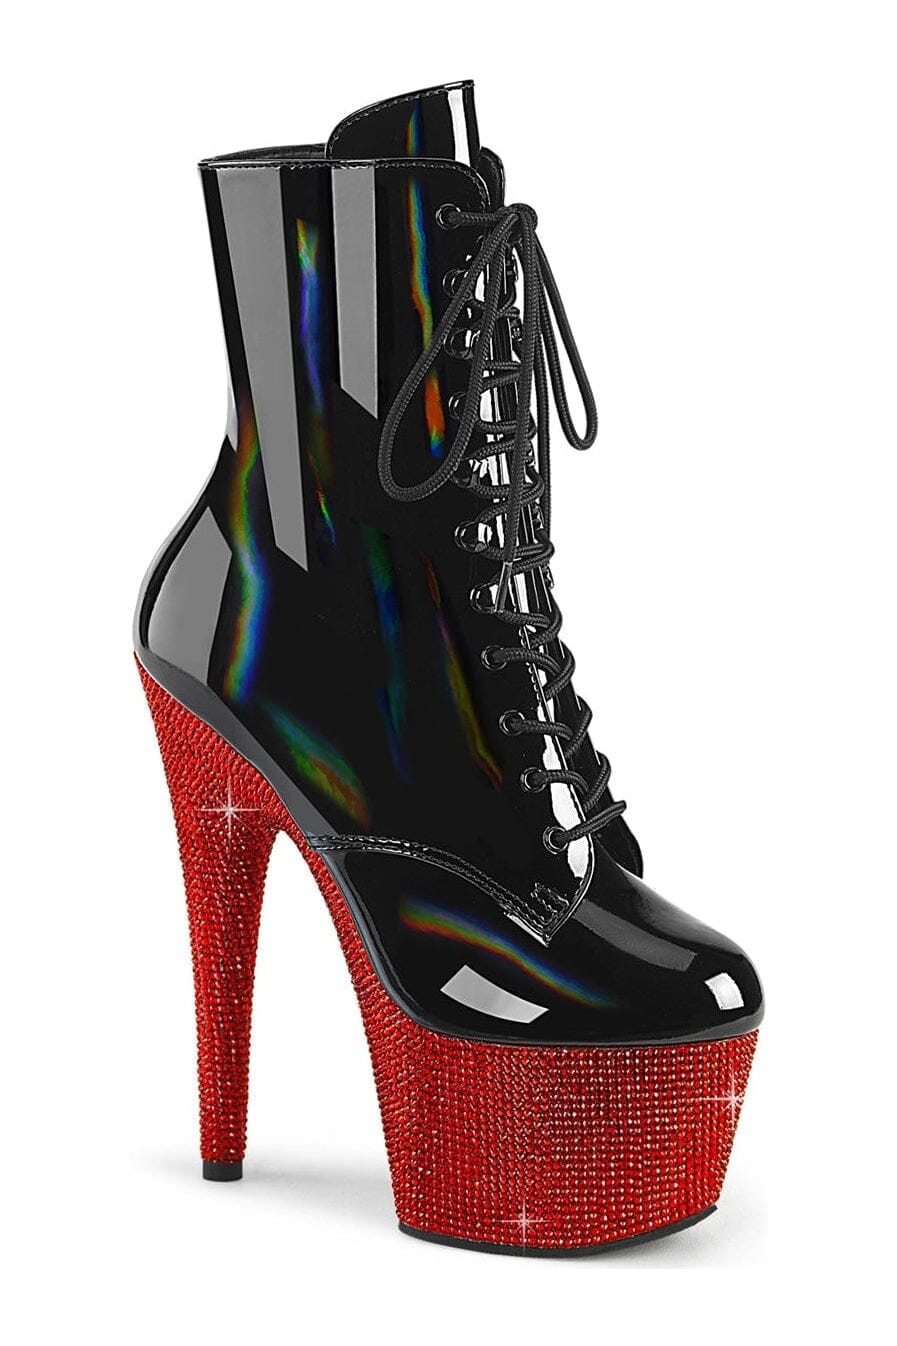 BEJEWELED-1020-7 Black Patent Ankle Boot-Ankle Boots-Pleaser-Black-10-Patent-SEXYSHOES.COM